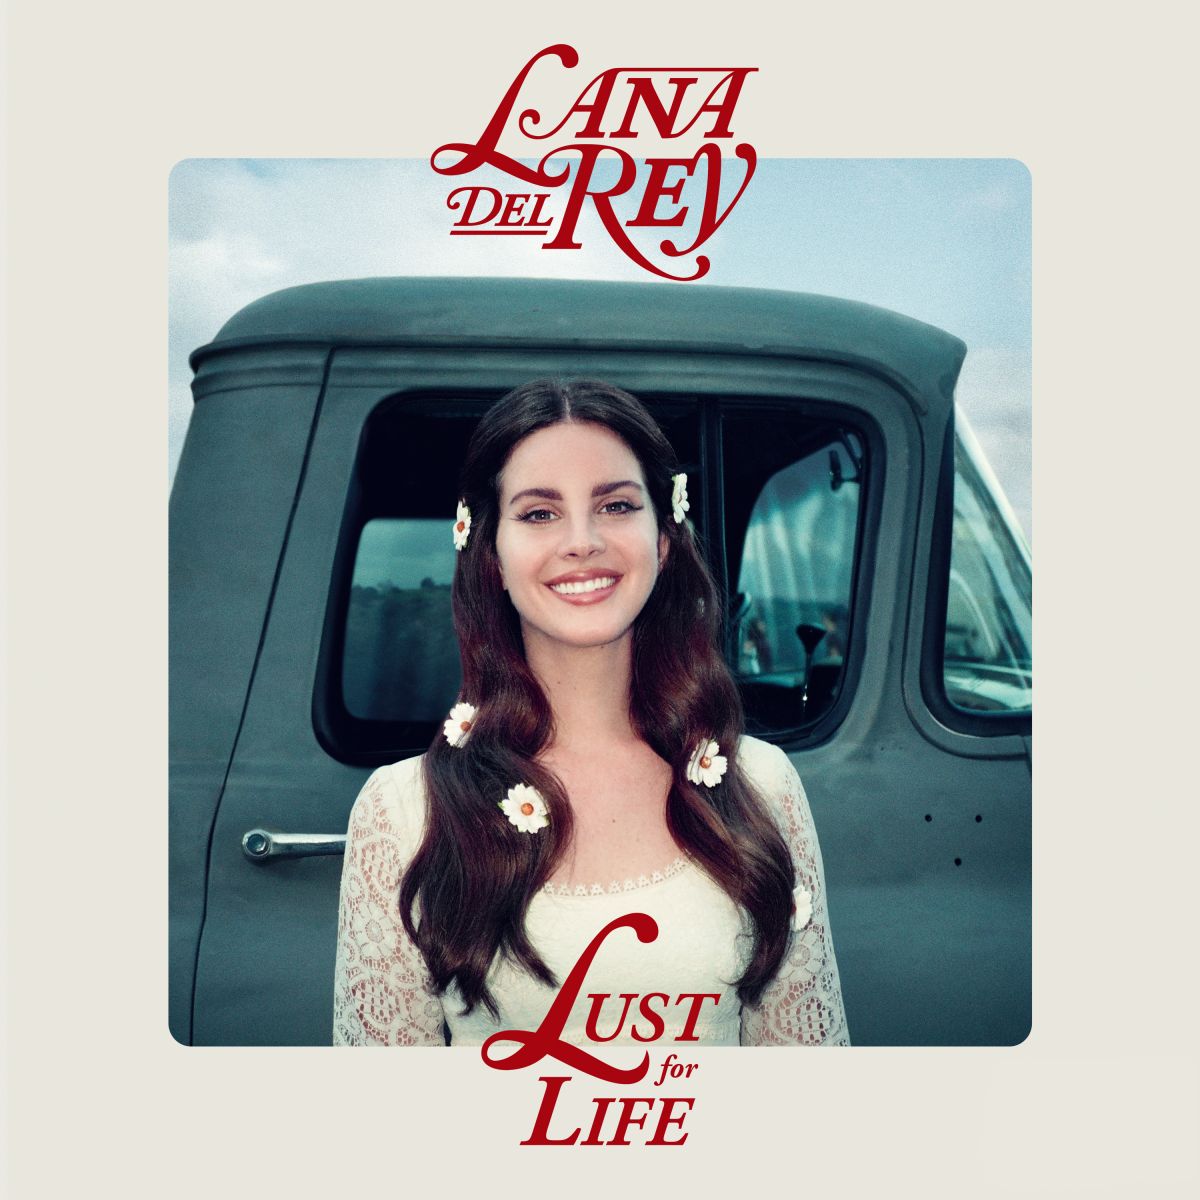 Here's Everything We Know About Lana Del Rey's New Album <i>Lust for Life</i> [UPDATE]” title=”lana-del-rey-lust-for-life-1499700072″ data-original-id=”248540″ data-adjusted-id=”248540″ class=”sm_size_full_width sm_alignment_center ” data-image-source=”professional” /></p>
<p><strong>She might be a witch now</strong></p>
<p>The <em>Lust for Life</em> era finds Del Rey embracing the occult, cooking up a cauldron of musical ingredients in the <a href=